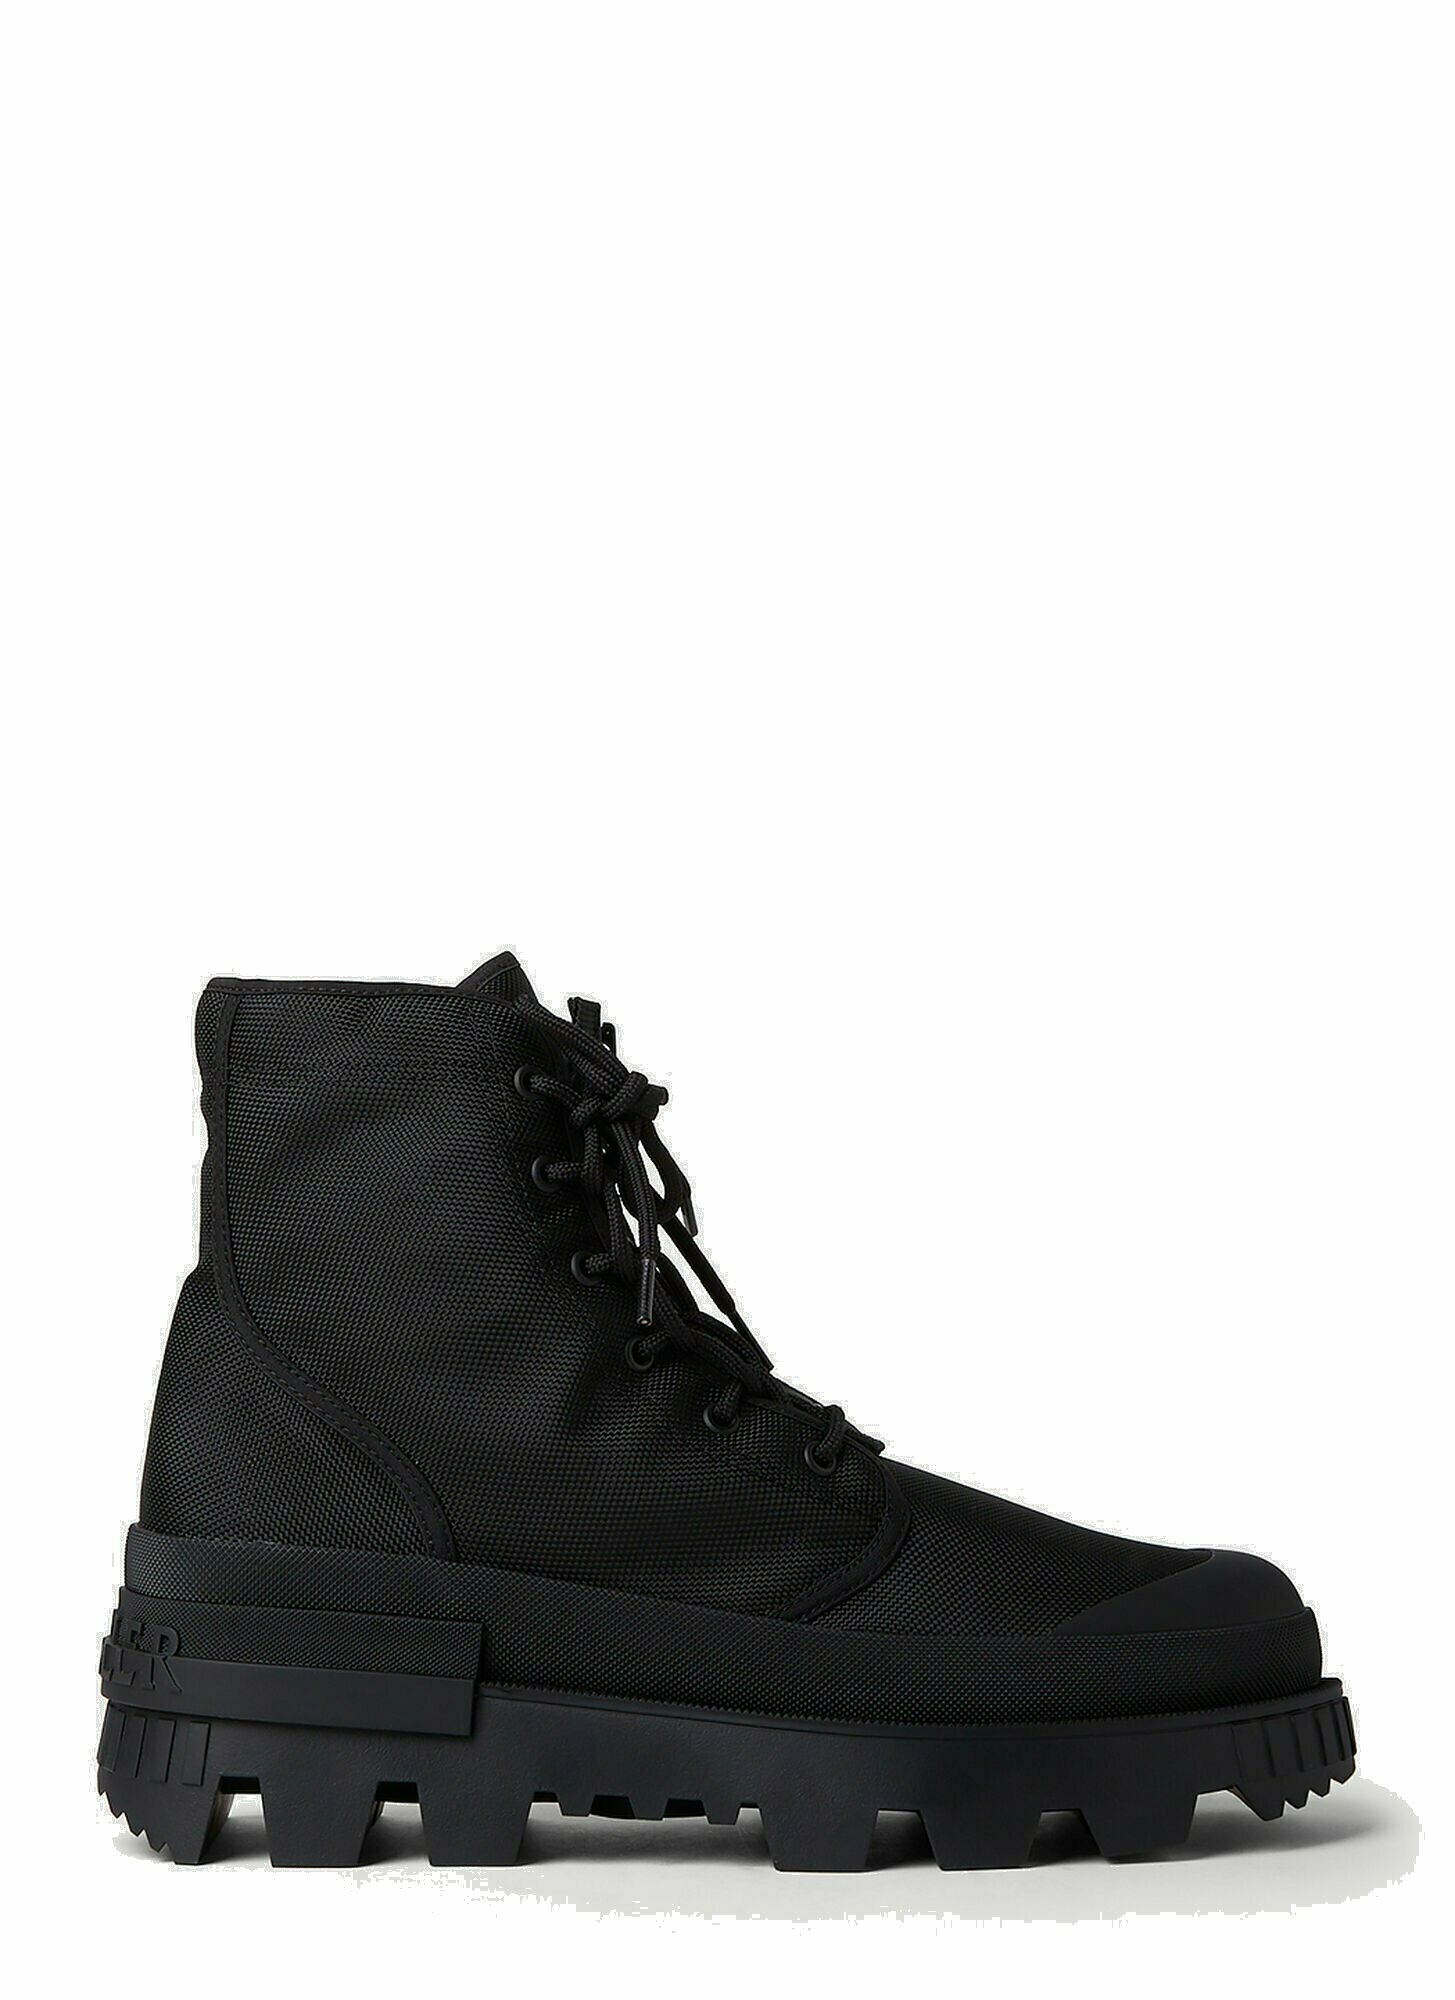 4 Moncler Hyke - Desertyx Ankle Boots in Black